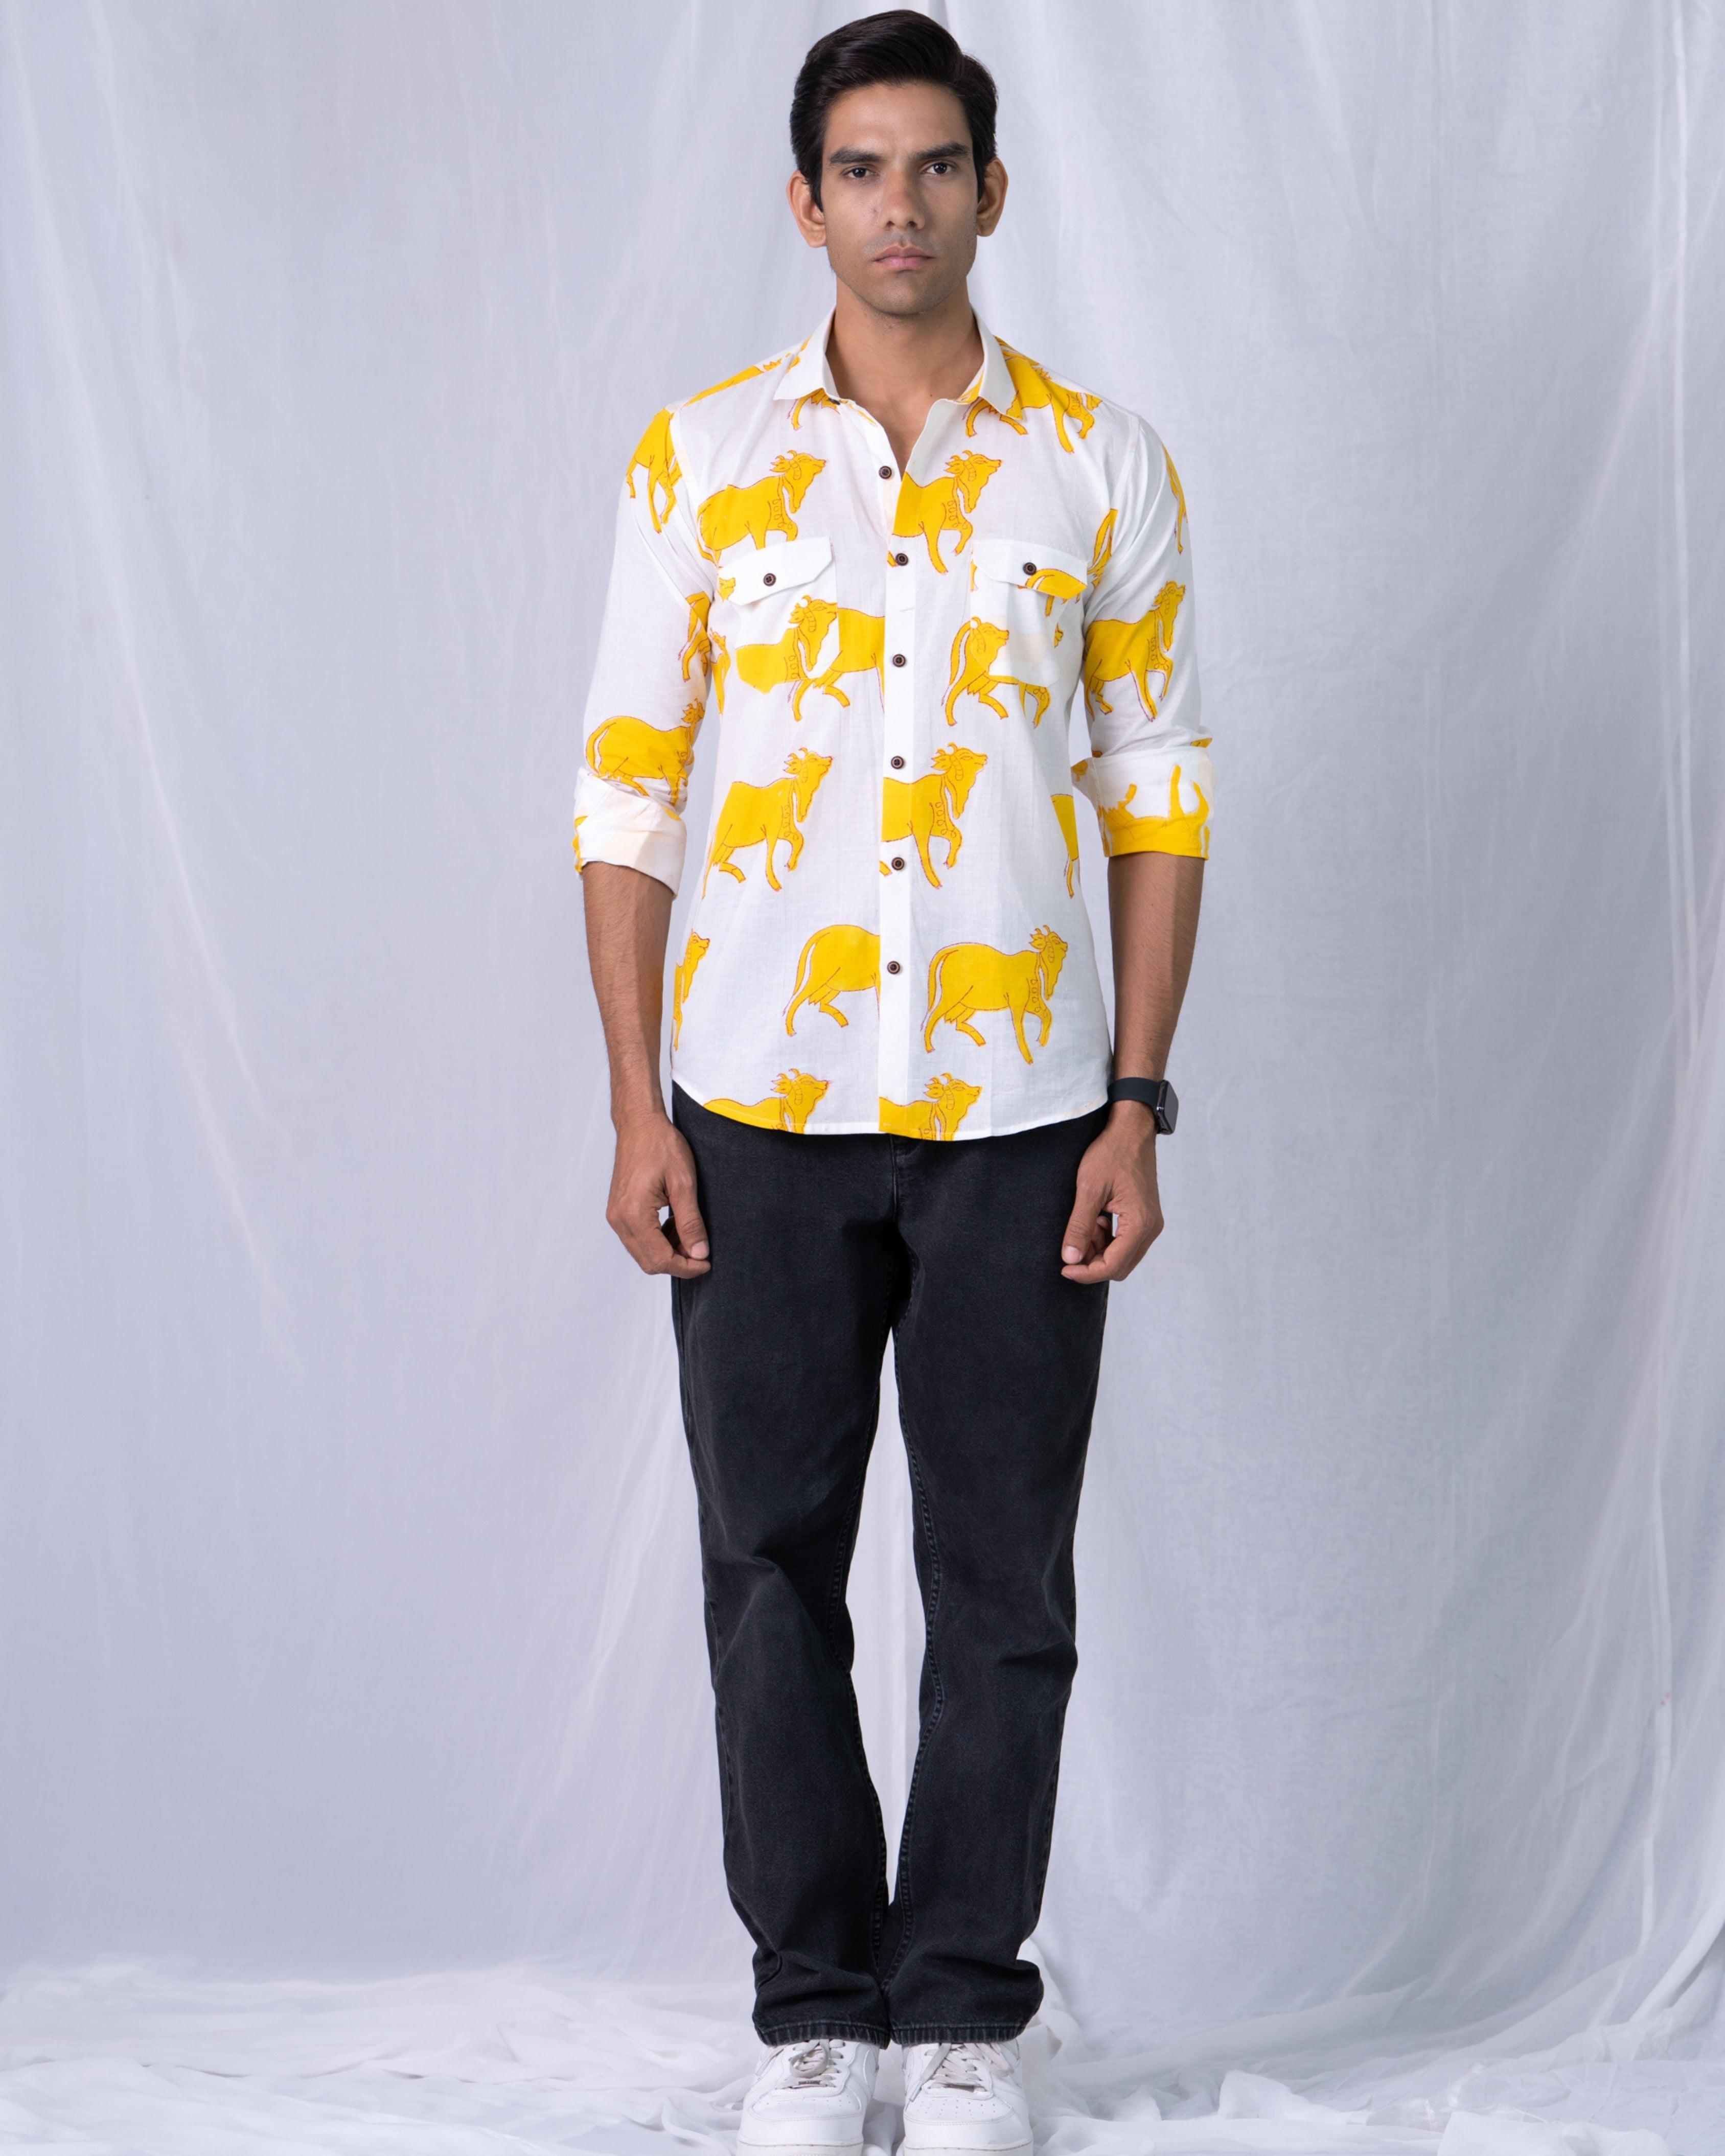 Firangi Yarn 100% Cotton Block Pichwai Cow Printed Casual Full Sleeves With Flap Pockets Men's Party Wear Shirt Yellow/White